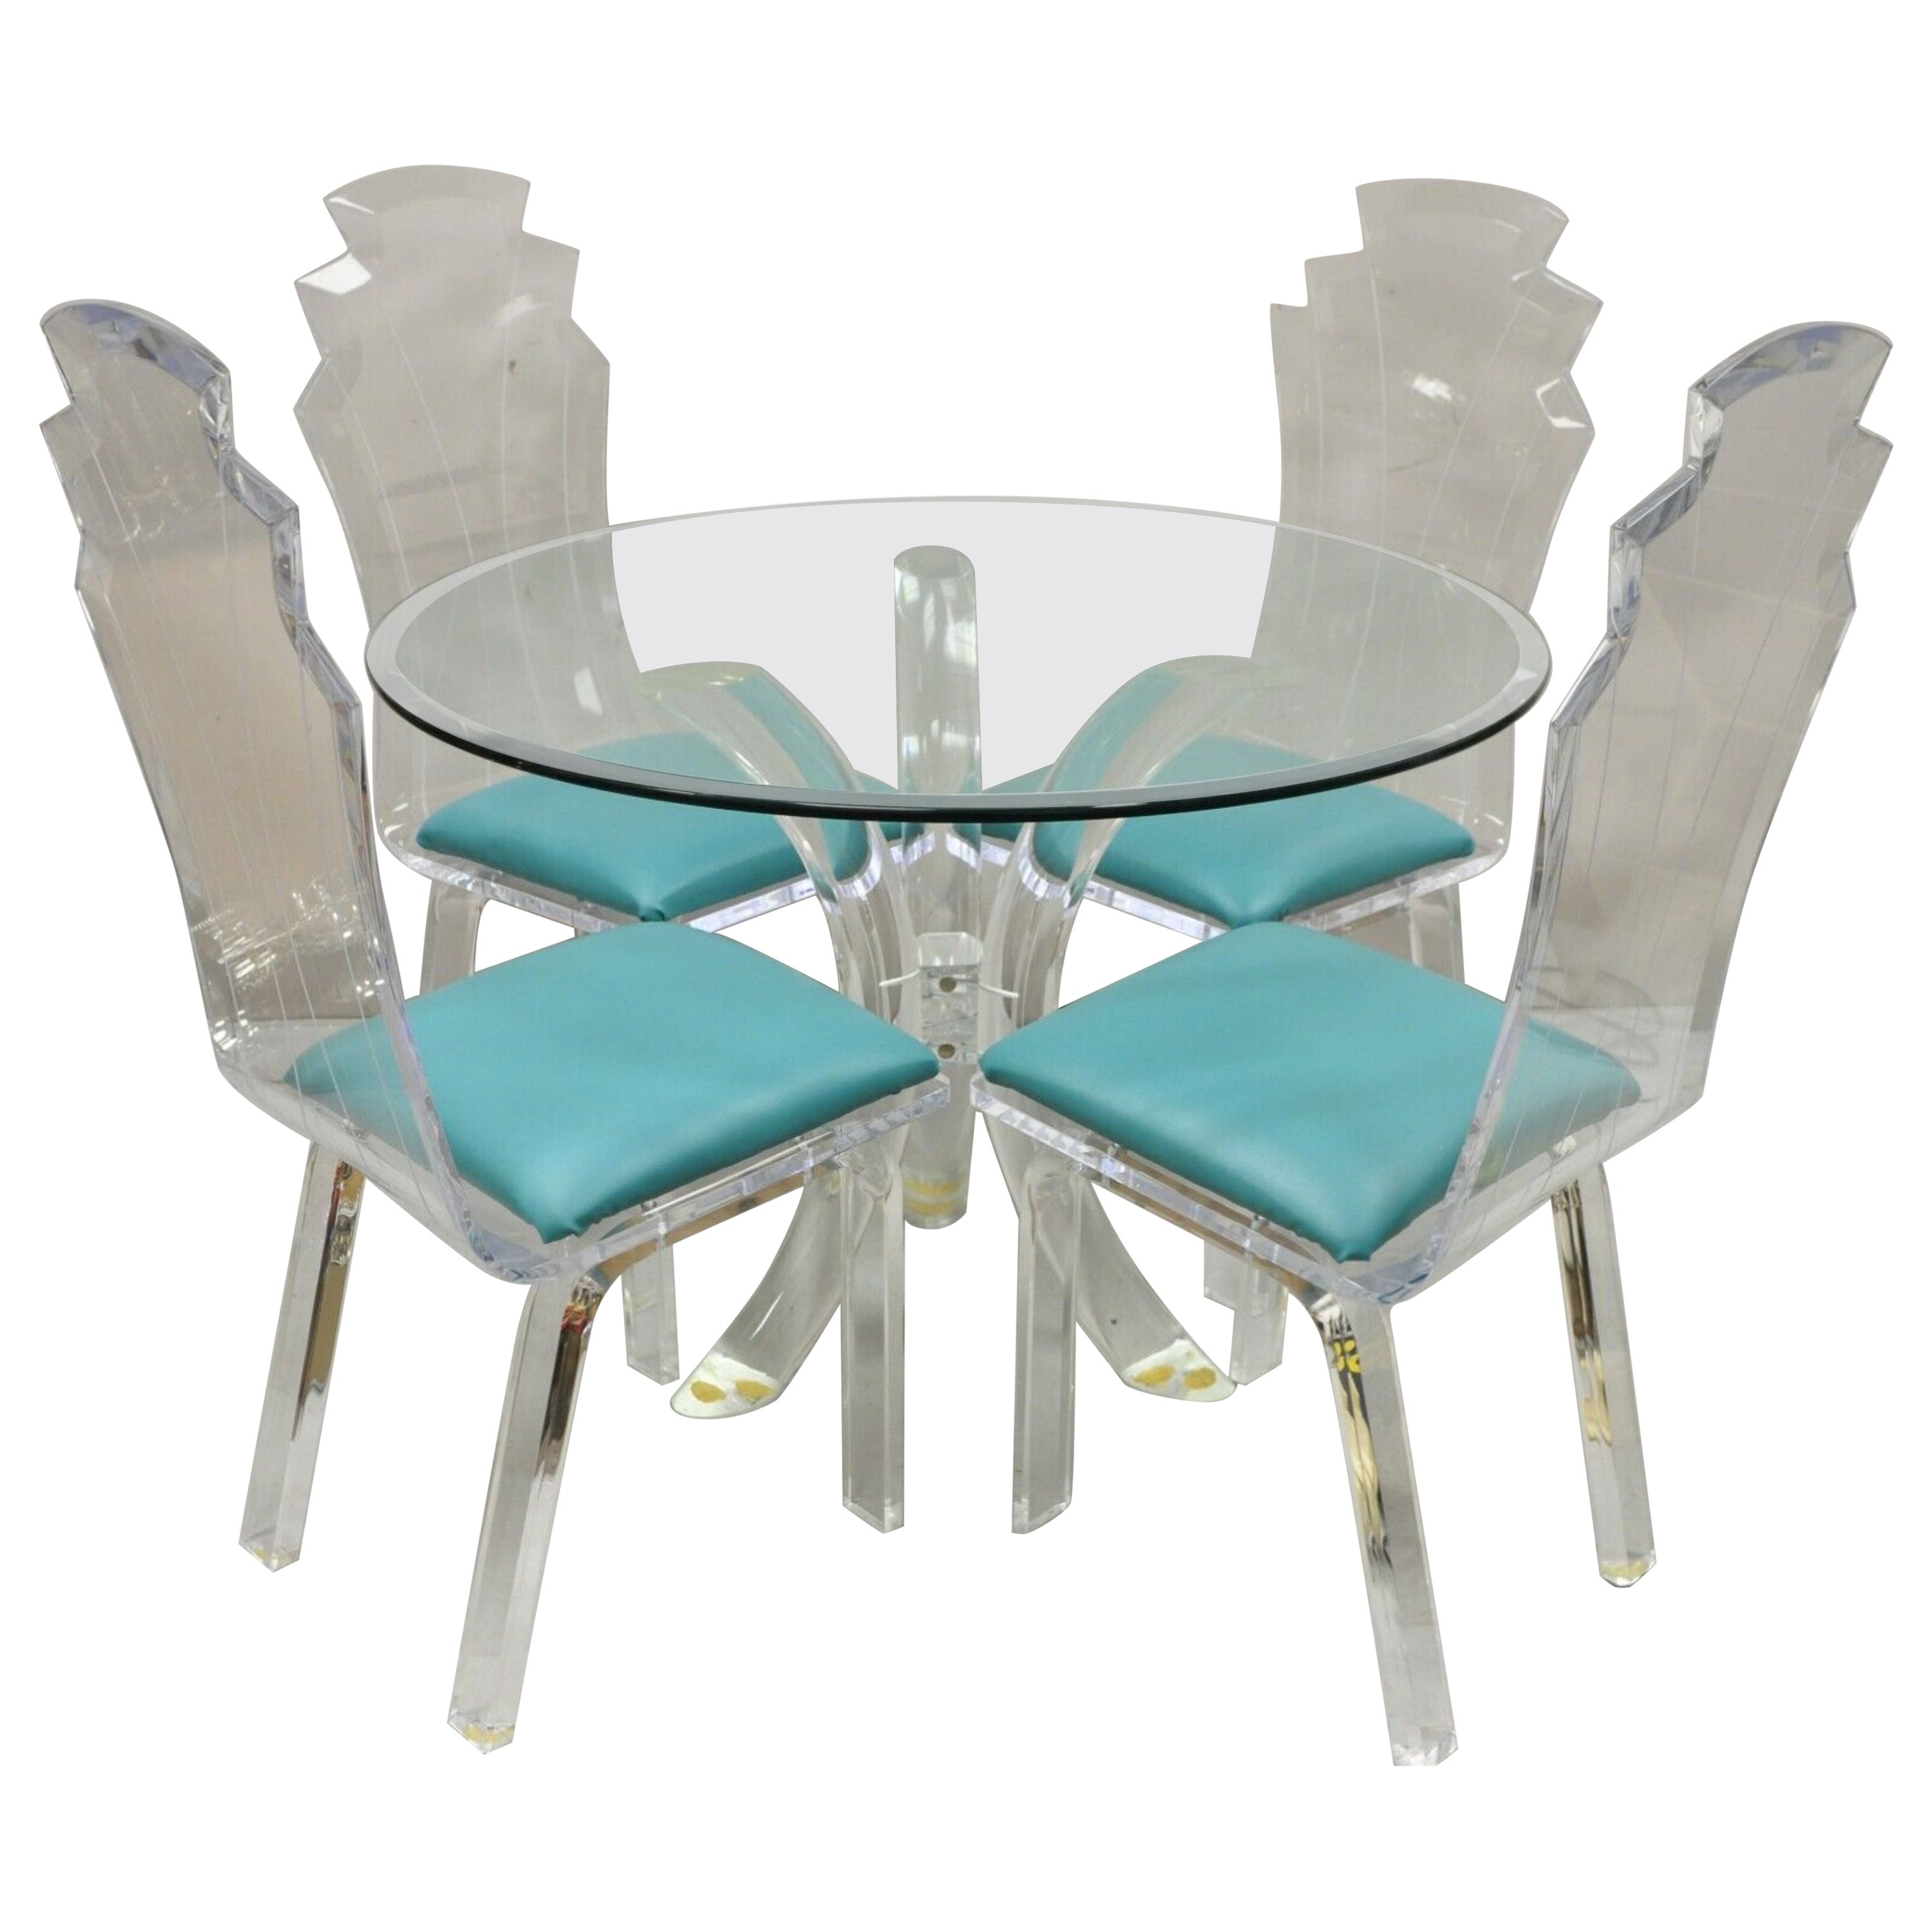 Vintage Lucite Acrylic Mid Century Sculptural Dining Table & 4 Chairs - 5 Pc Set